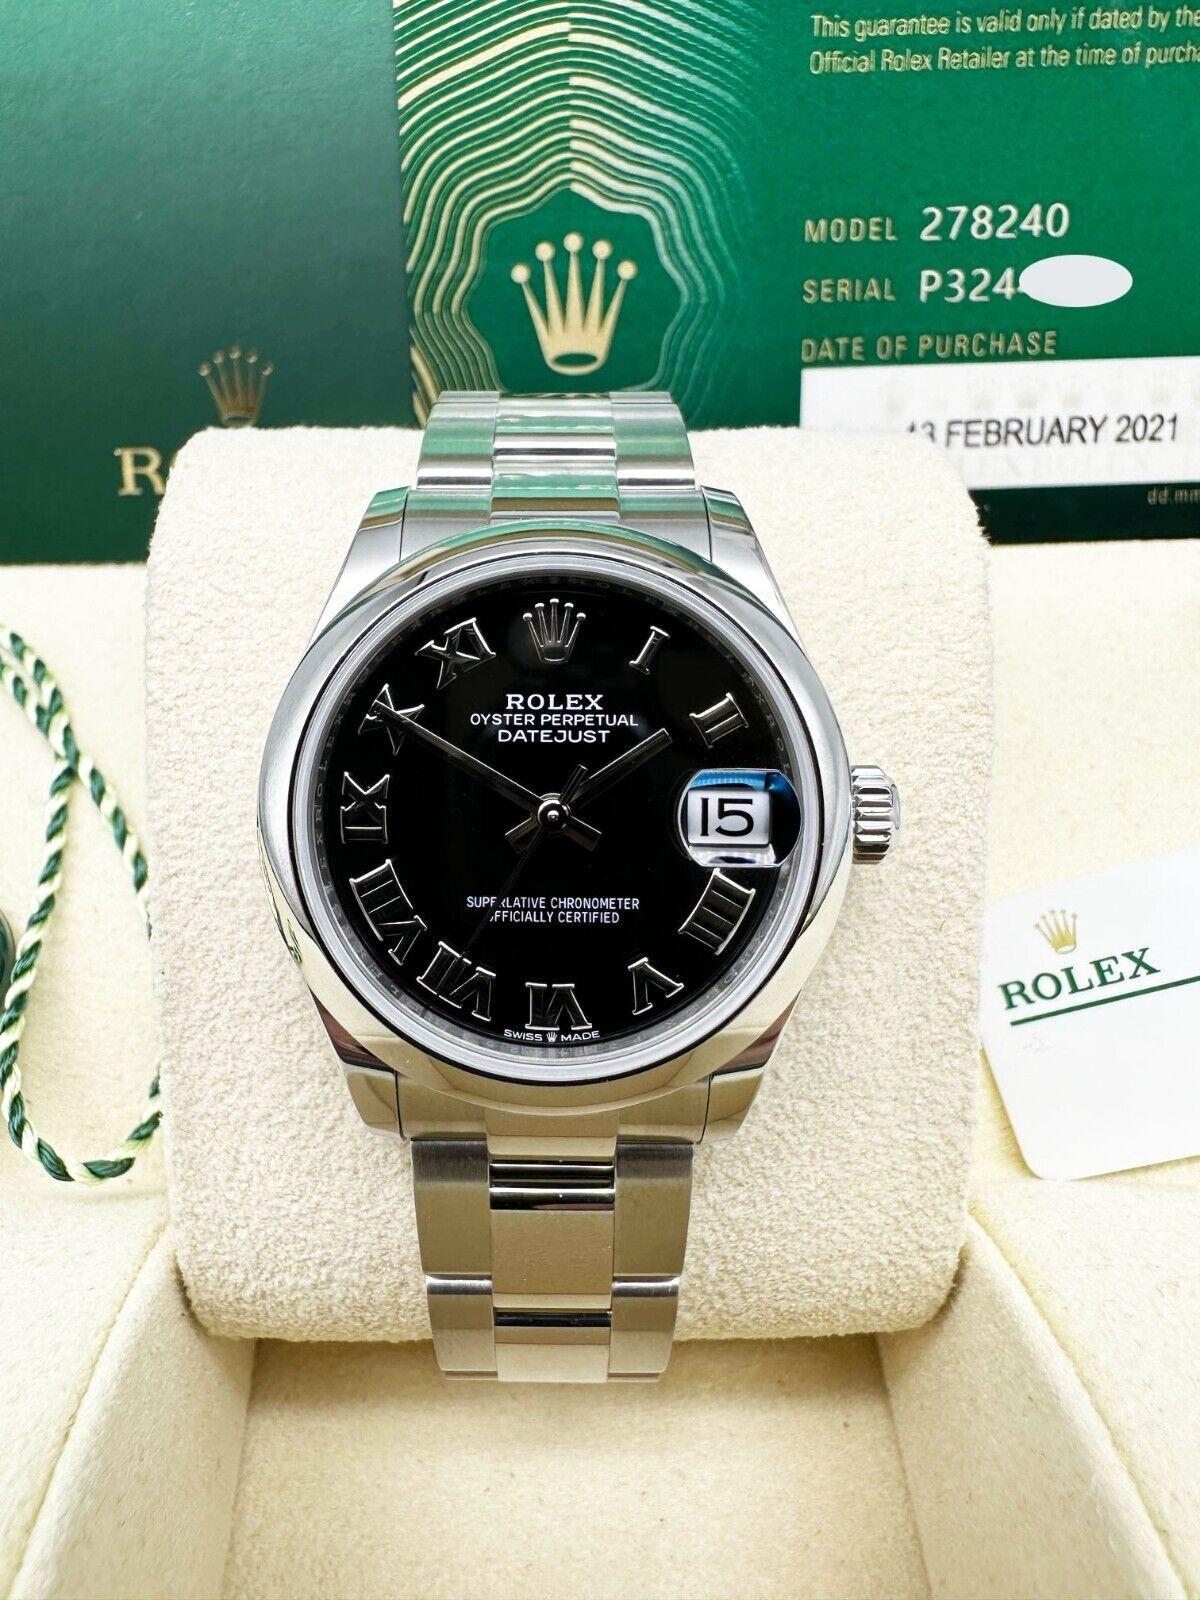 Style Number: 278240

 

Serial: P3244***


Year: 2021

 

Model: Midsize Datejust

 

Case Material: Stainless Steel

 

Band: Stainless Steel

 

Bezel: Stainless Steel

 

Dial: Black Roman Dial

 

Face: Sapphire Crystal

 

Case Size: 31mm

